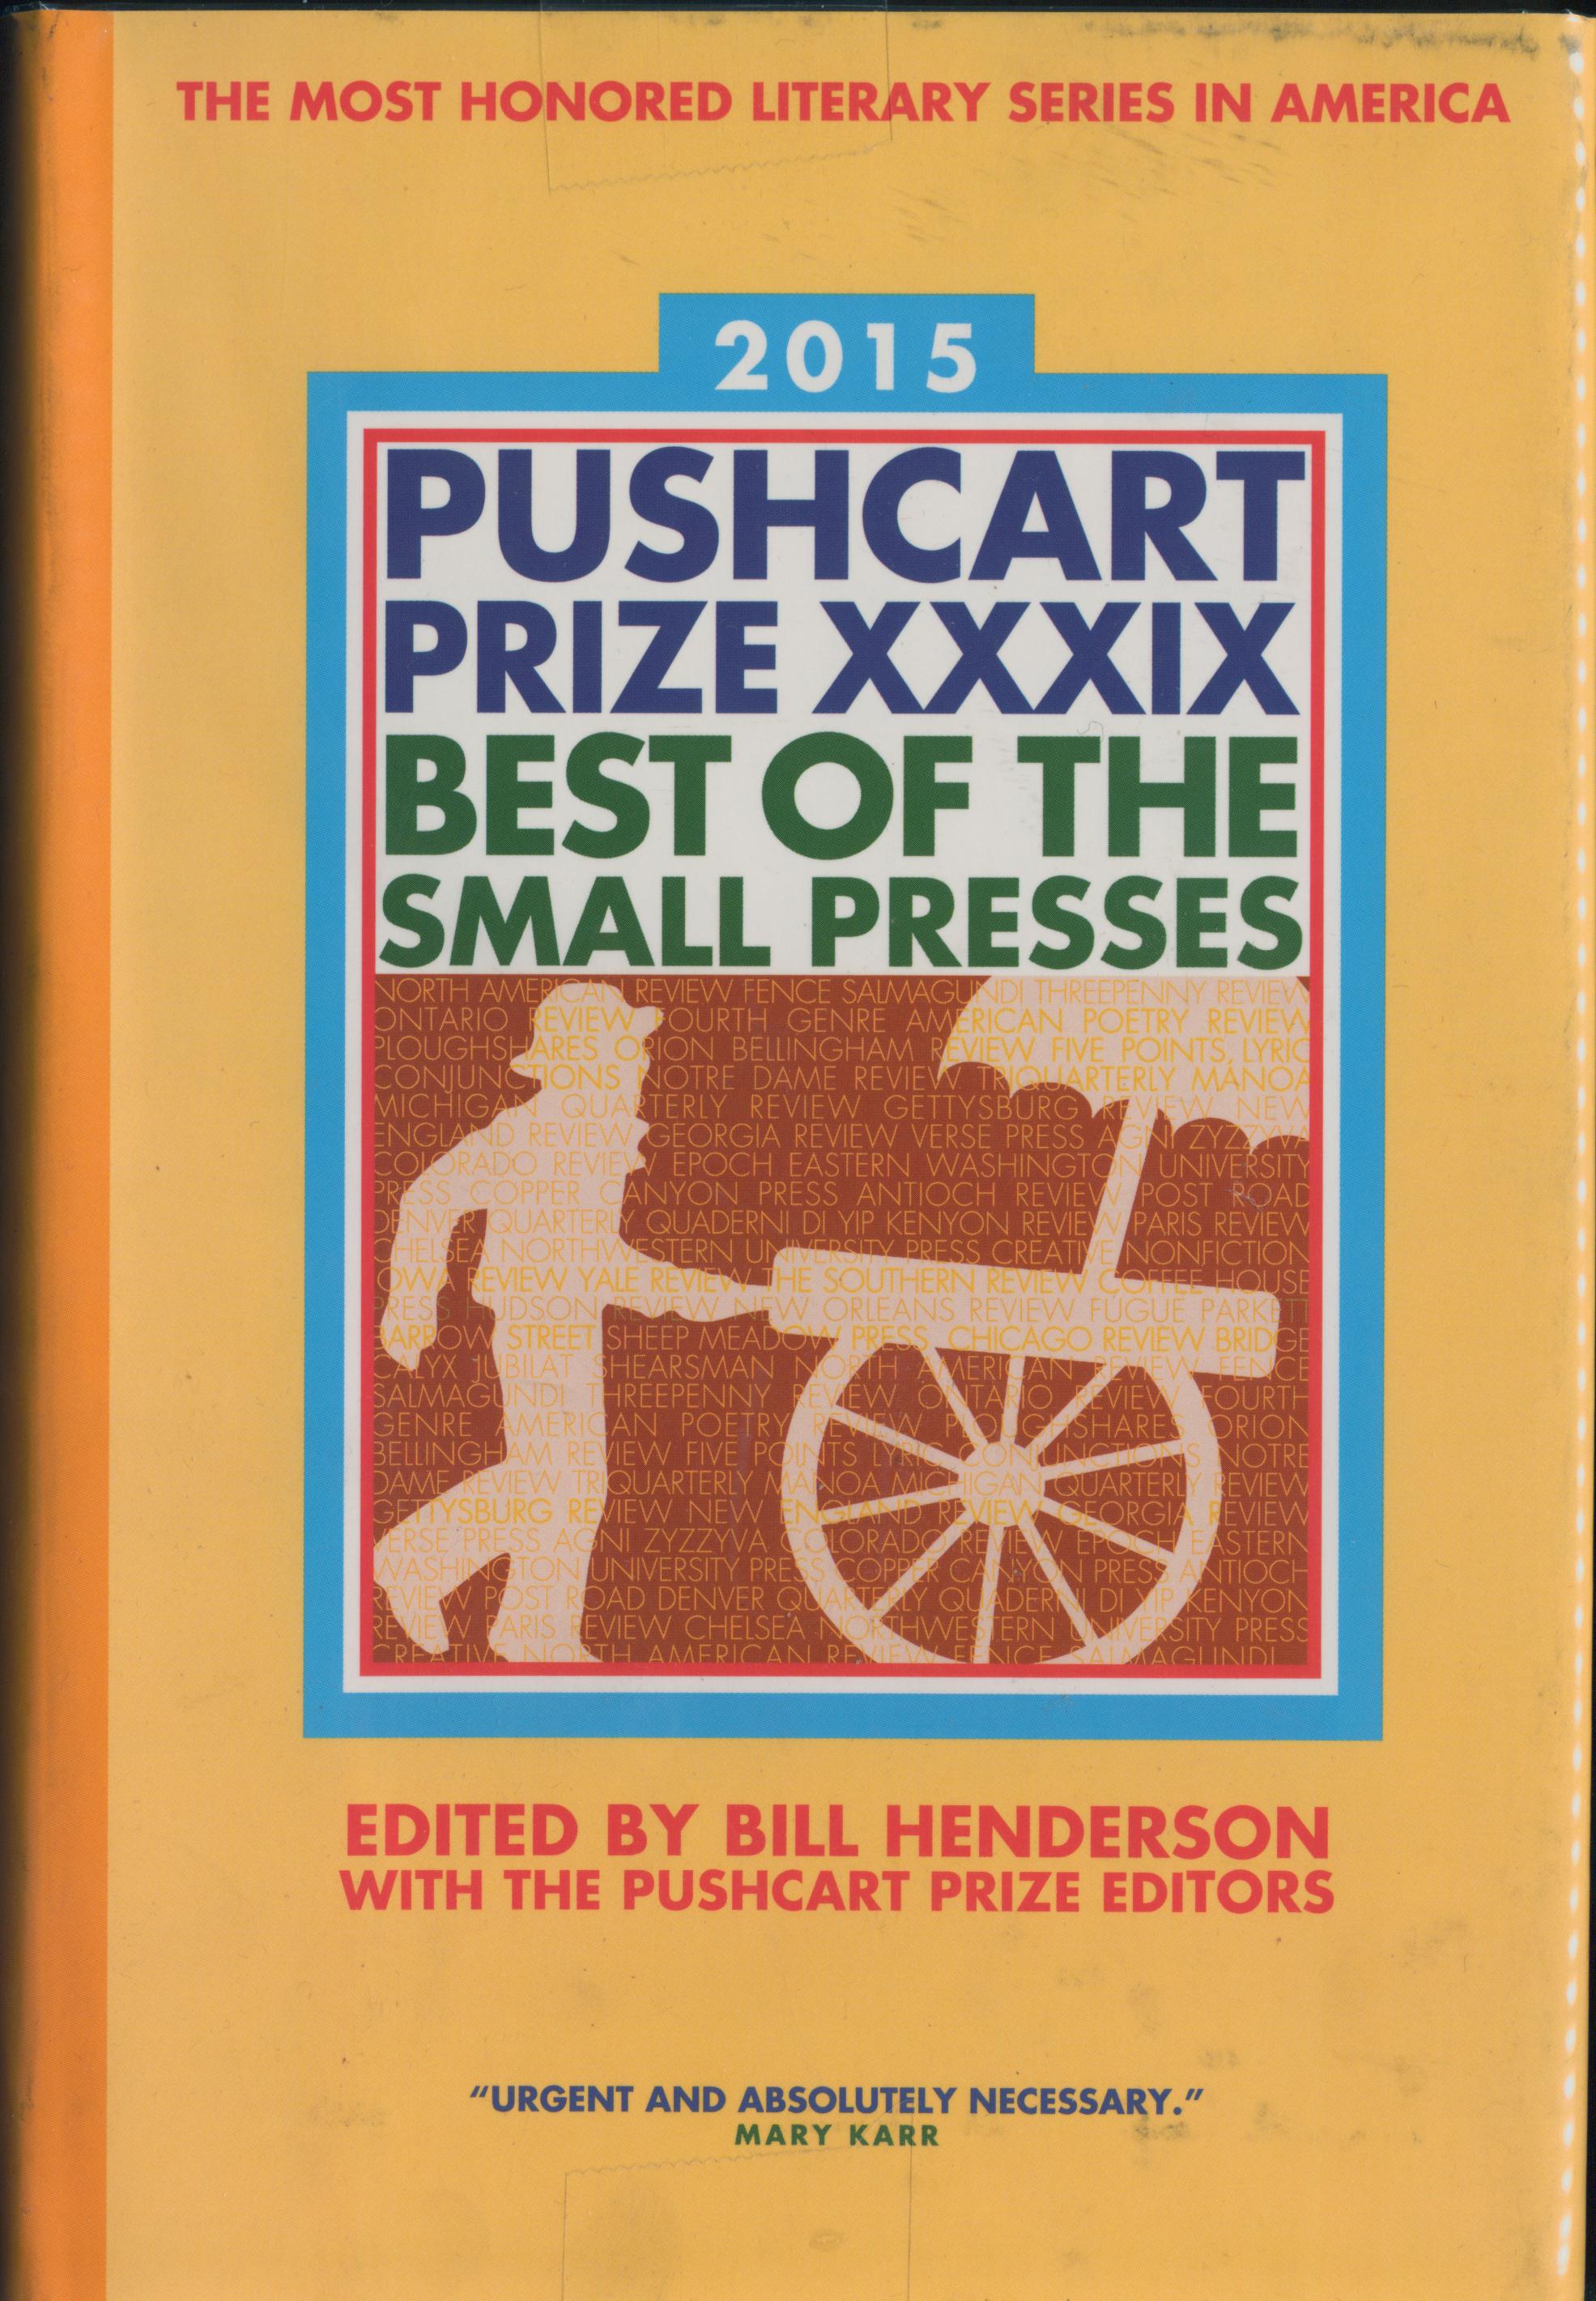 Pushcart Prize XXXIX: Best of the Small Presses